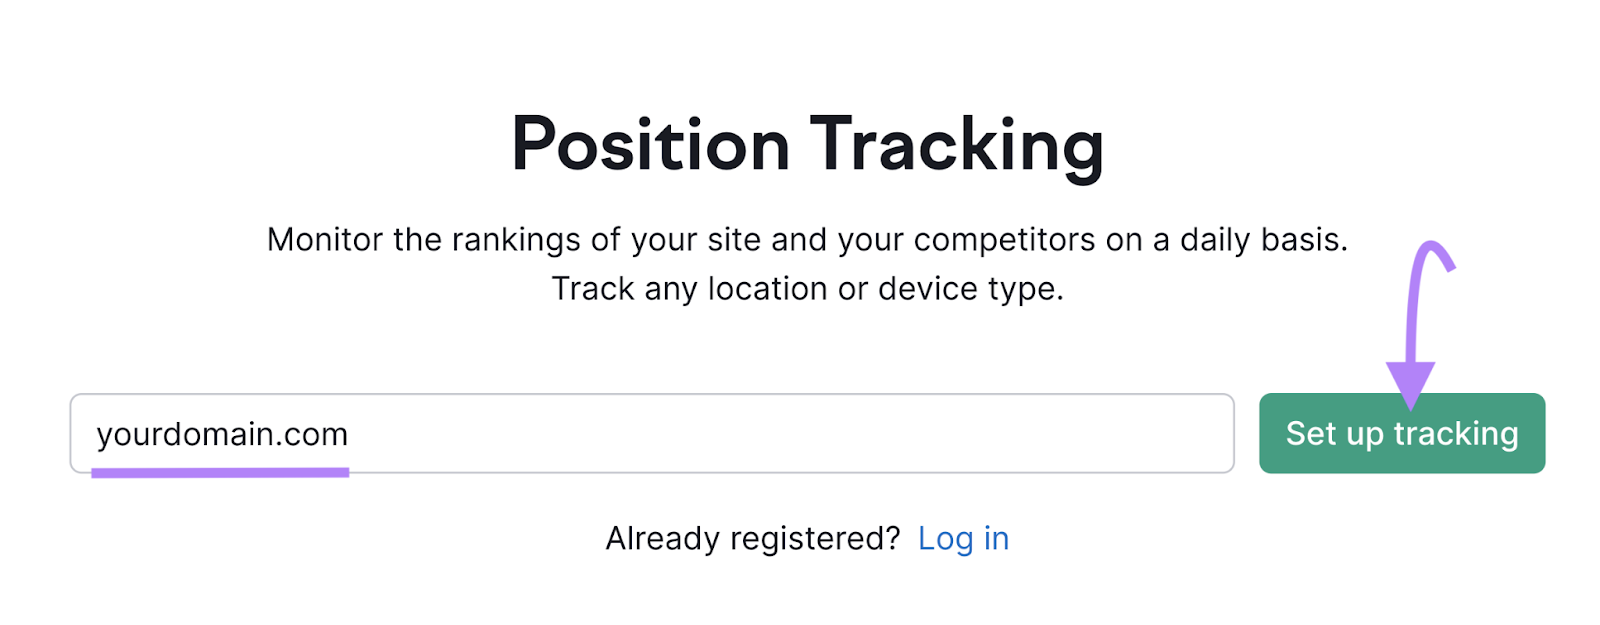 Position Tracking instrumentality   hunt  for a domain